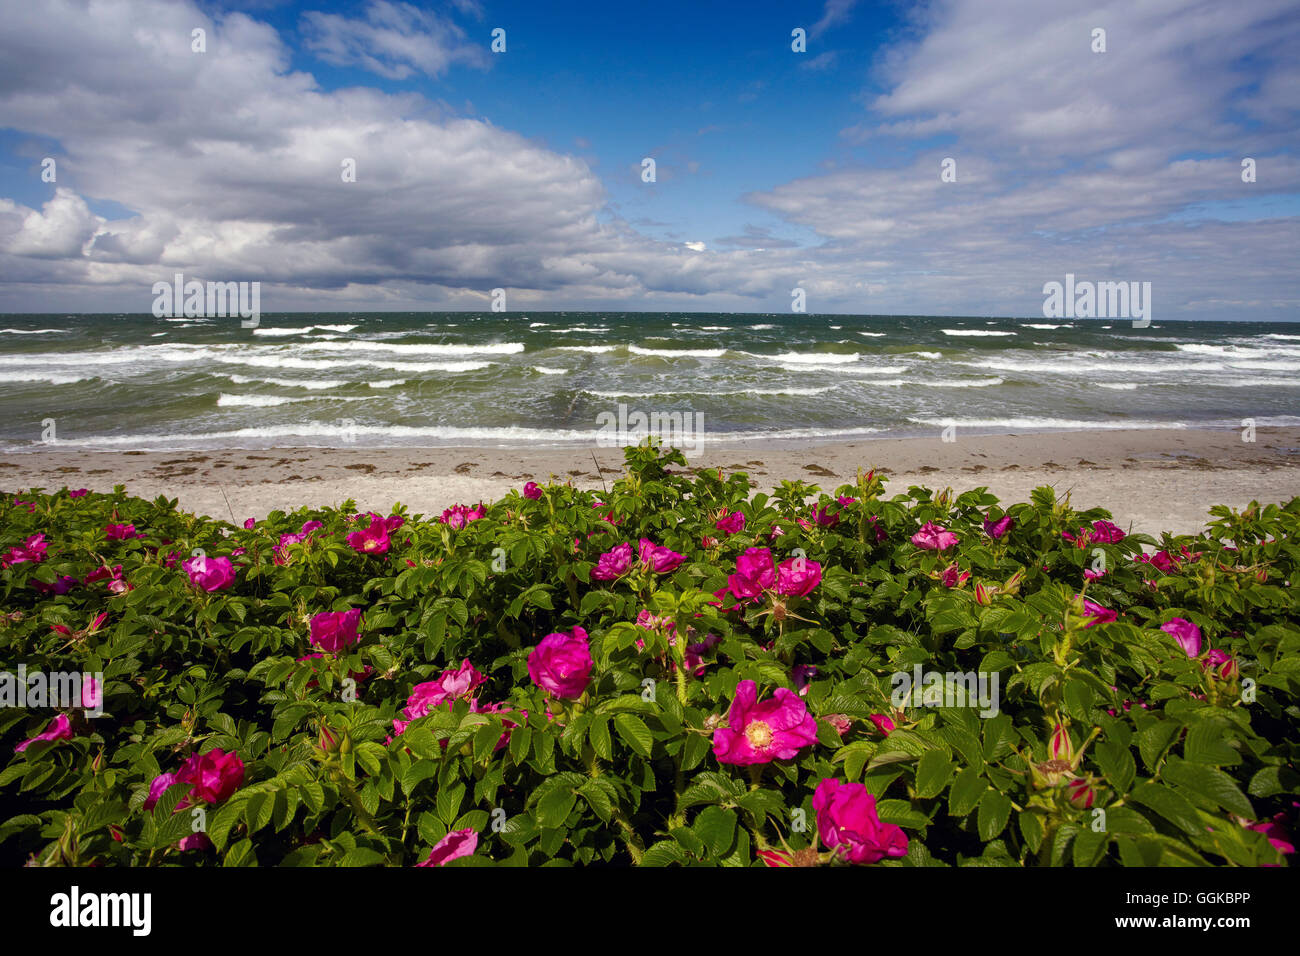 Wild roses along the Baltic Sea coast, Hiddensee, Mecklenburg Vorpommern, Germany Stock Photo